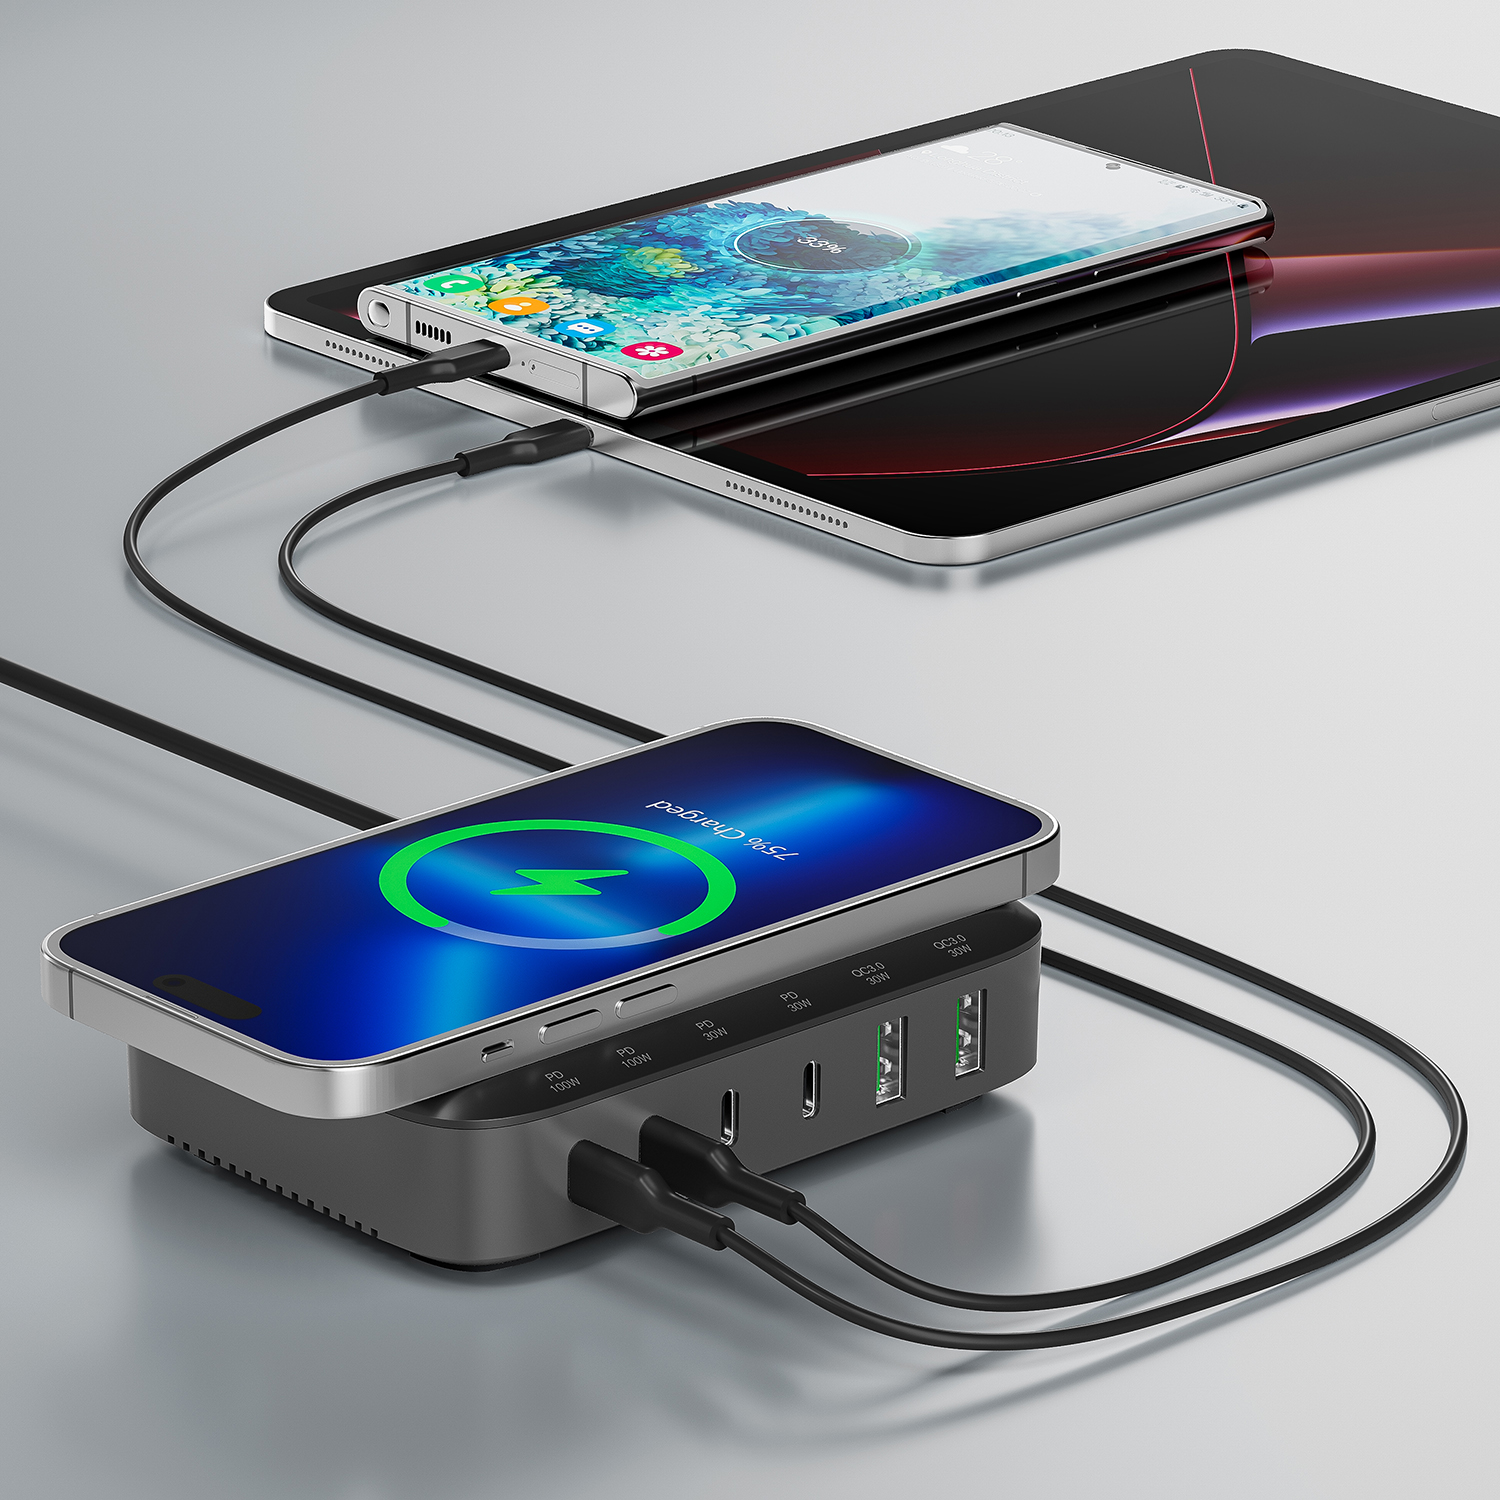 The qi charging process is possible with the 4smarts 7in1 GaN charging station.